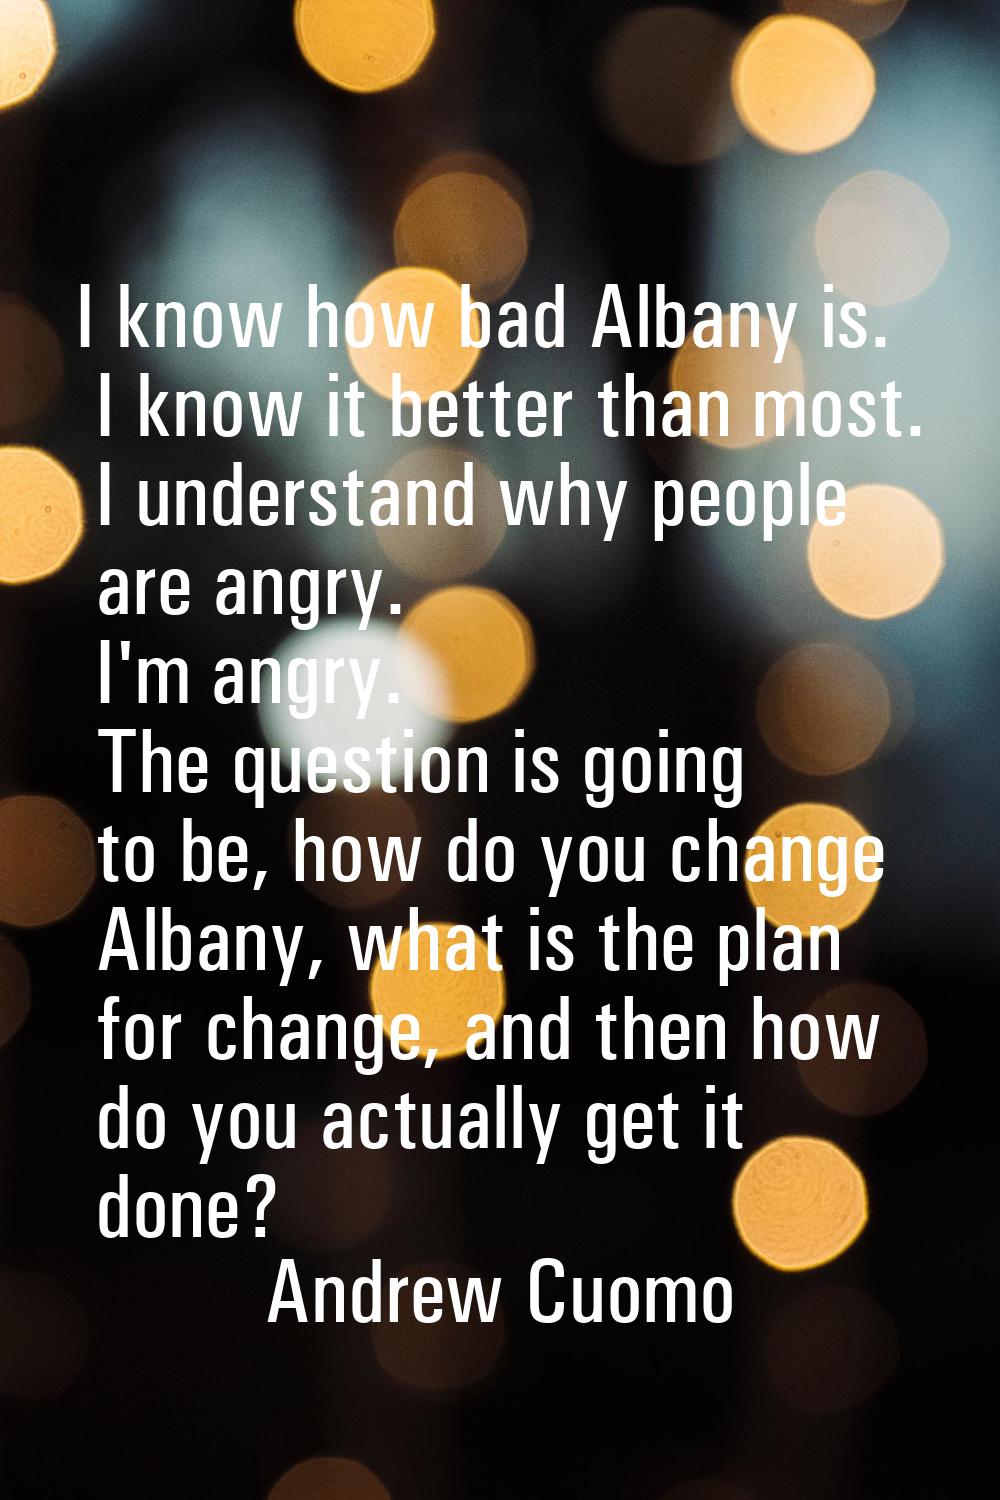 I know how bad Albany is. I know it better than most. I understand why people are angry. I'm angry.